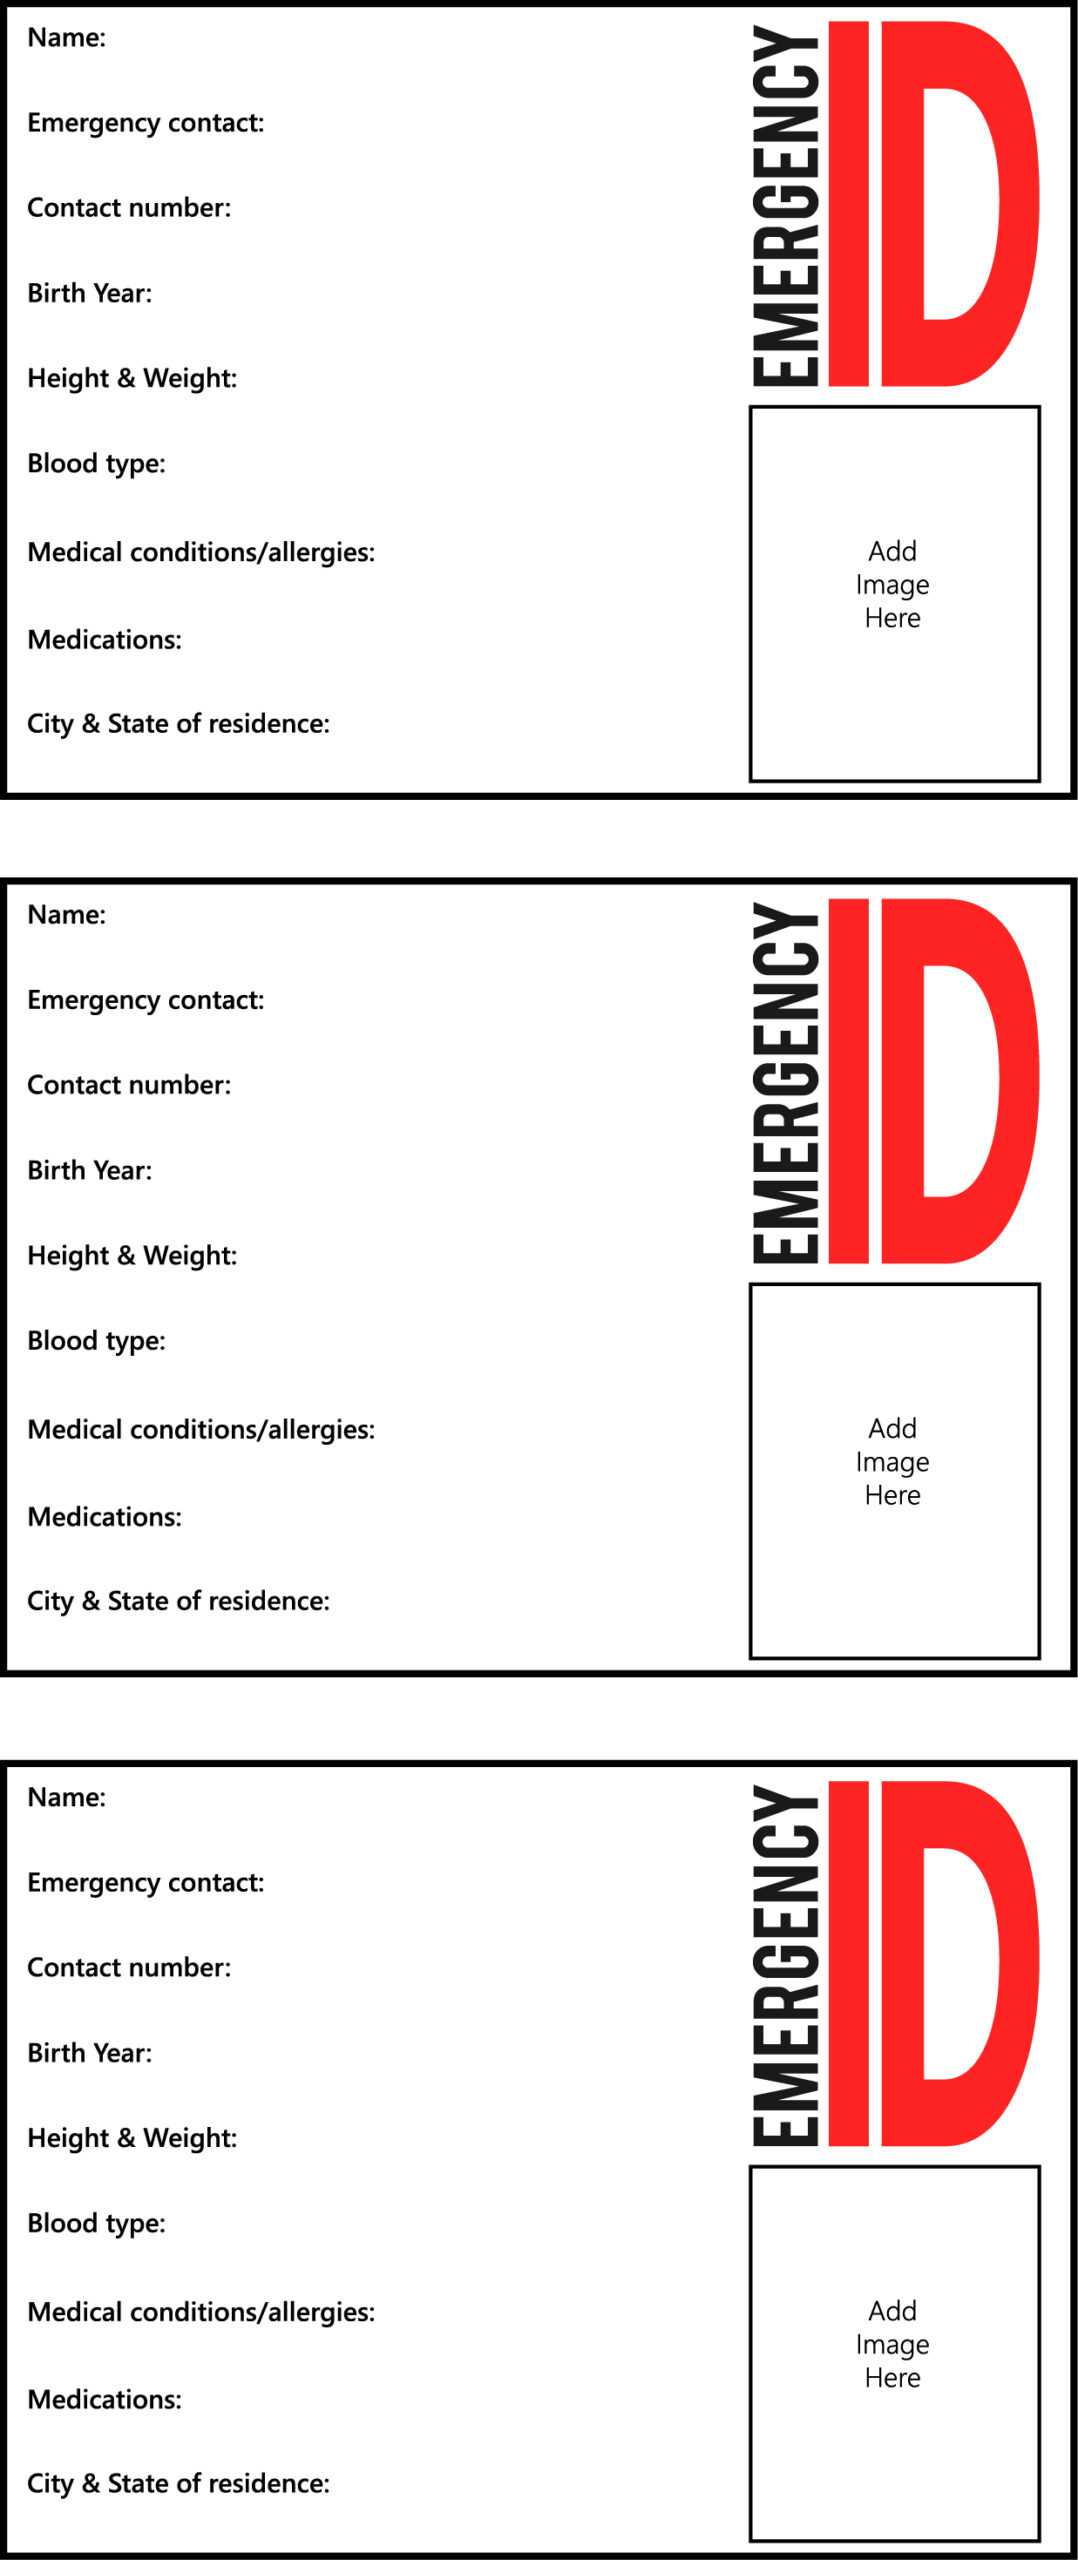 25 Images Of Fire Identification Card Template | Masorler Pertaining To In Case Of Emergency Card Template